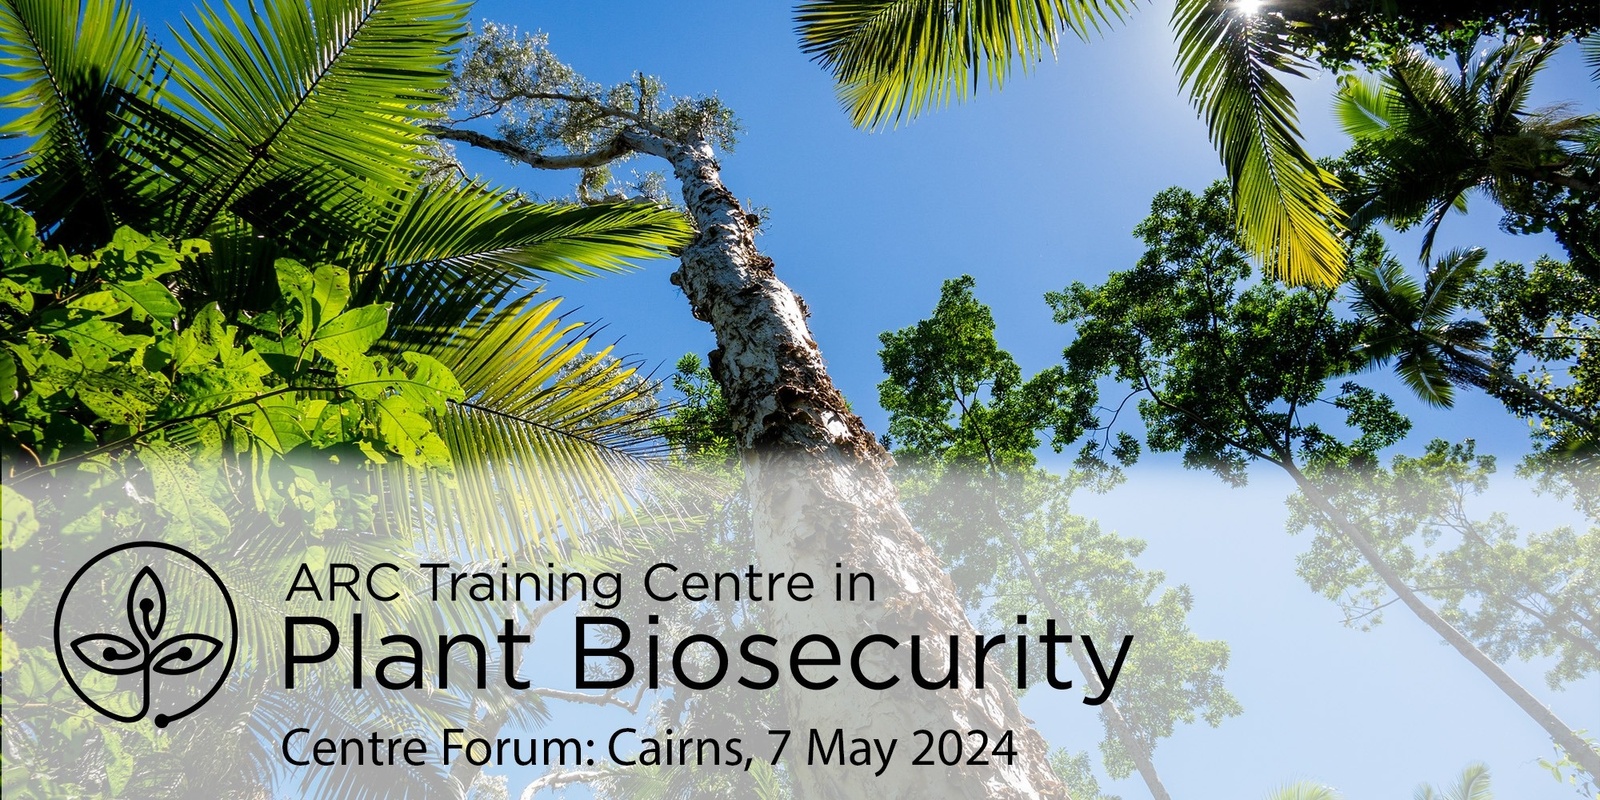 Banner image for Plant Biosecurity Training Centre Forum